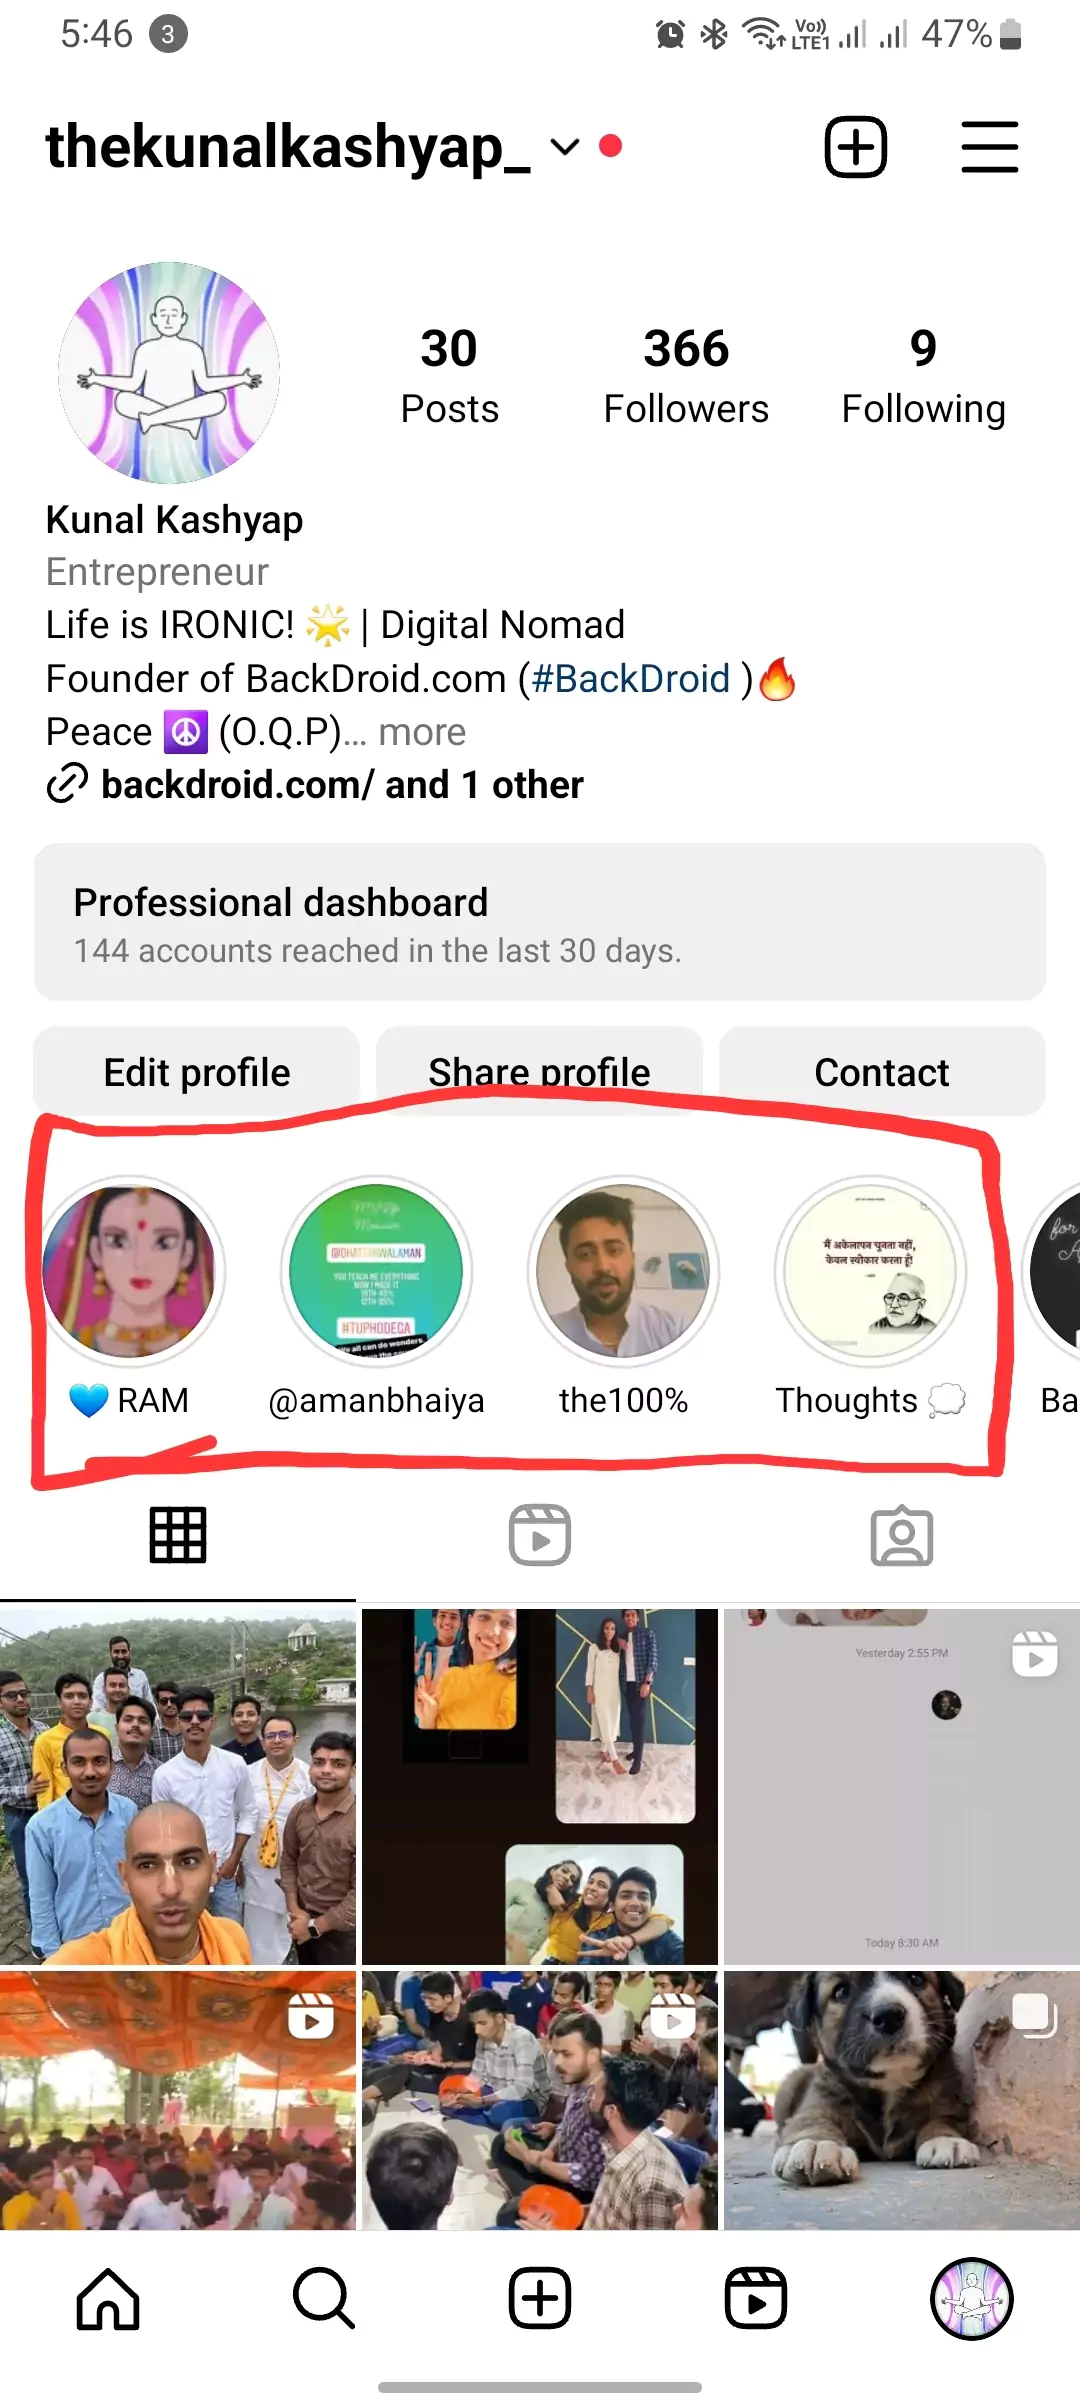 all the instagram highlights are highlighted in red